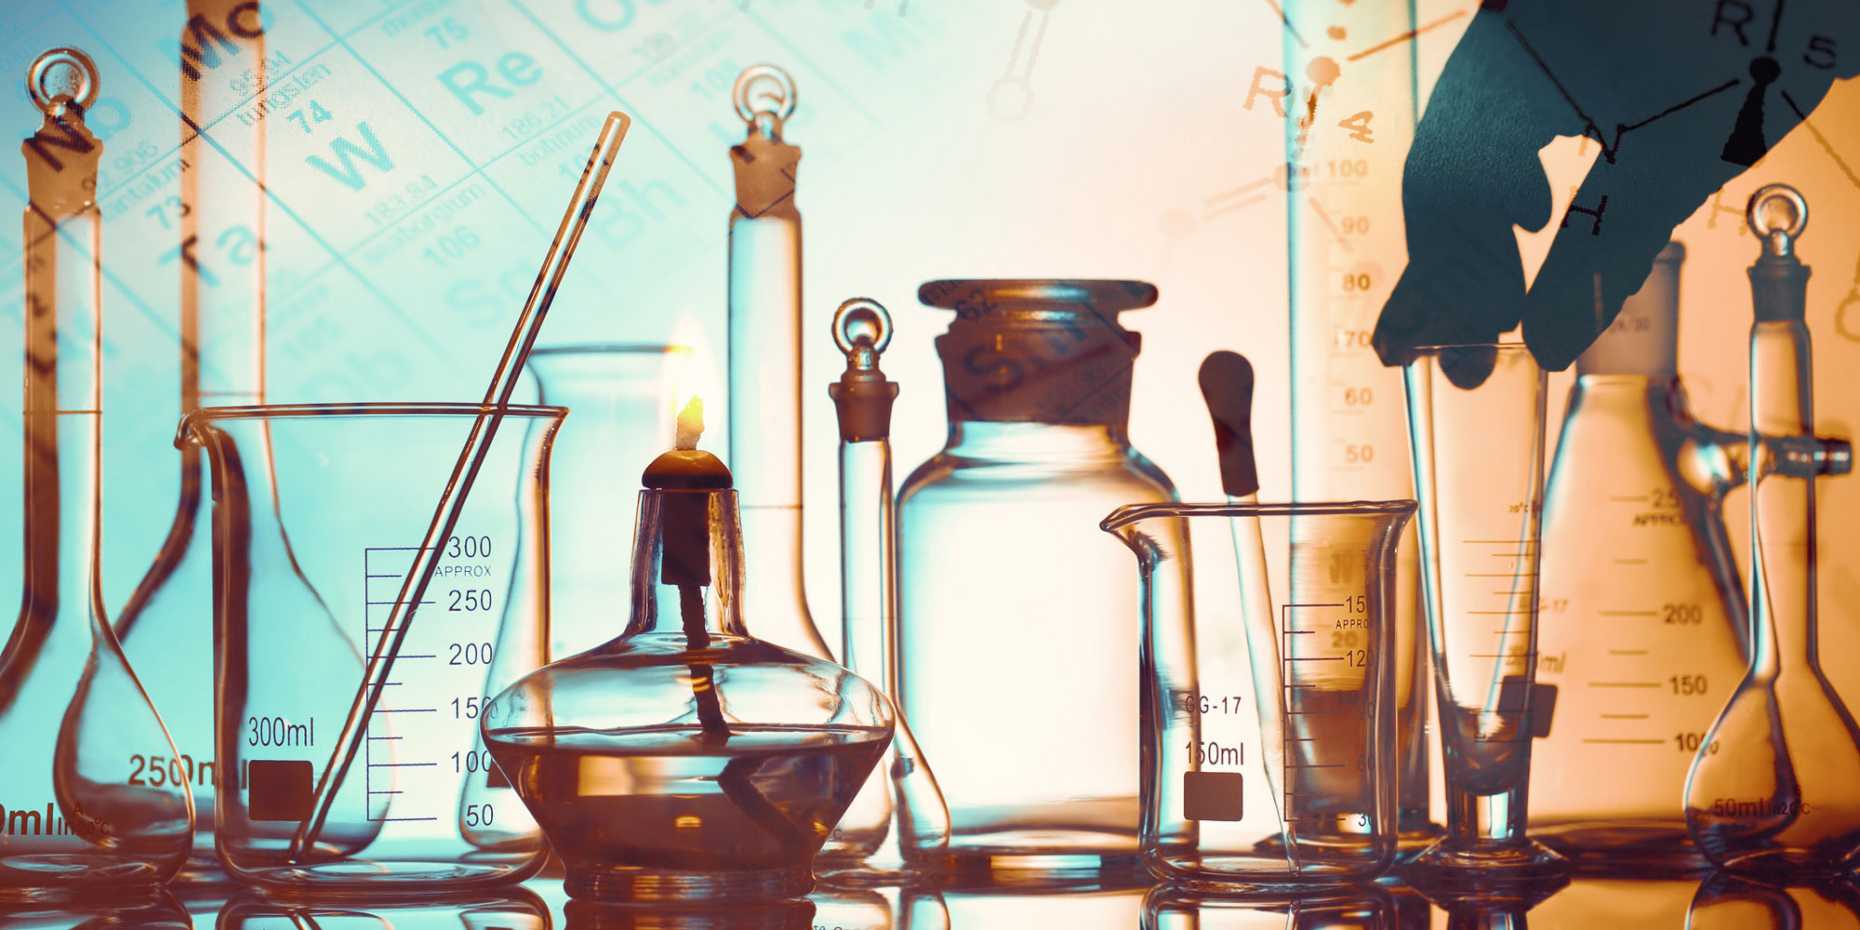 There are an ever-greater number of industrial chemicals on the world market, but many lack publicly available information on aspects such as their chemical identities and hazard potential. (Photograph: fotohunter/iStock)